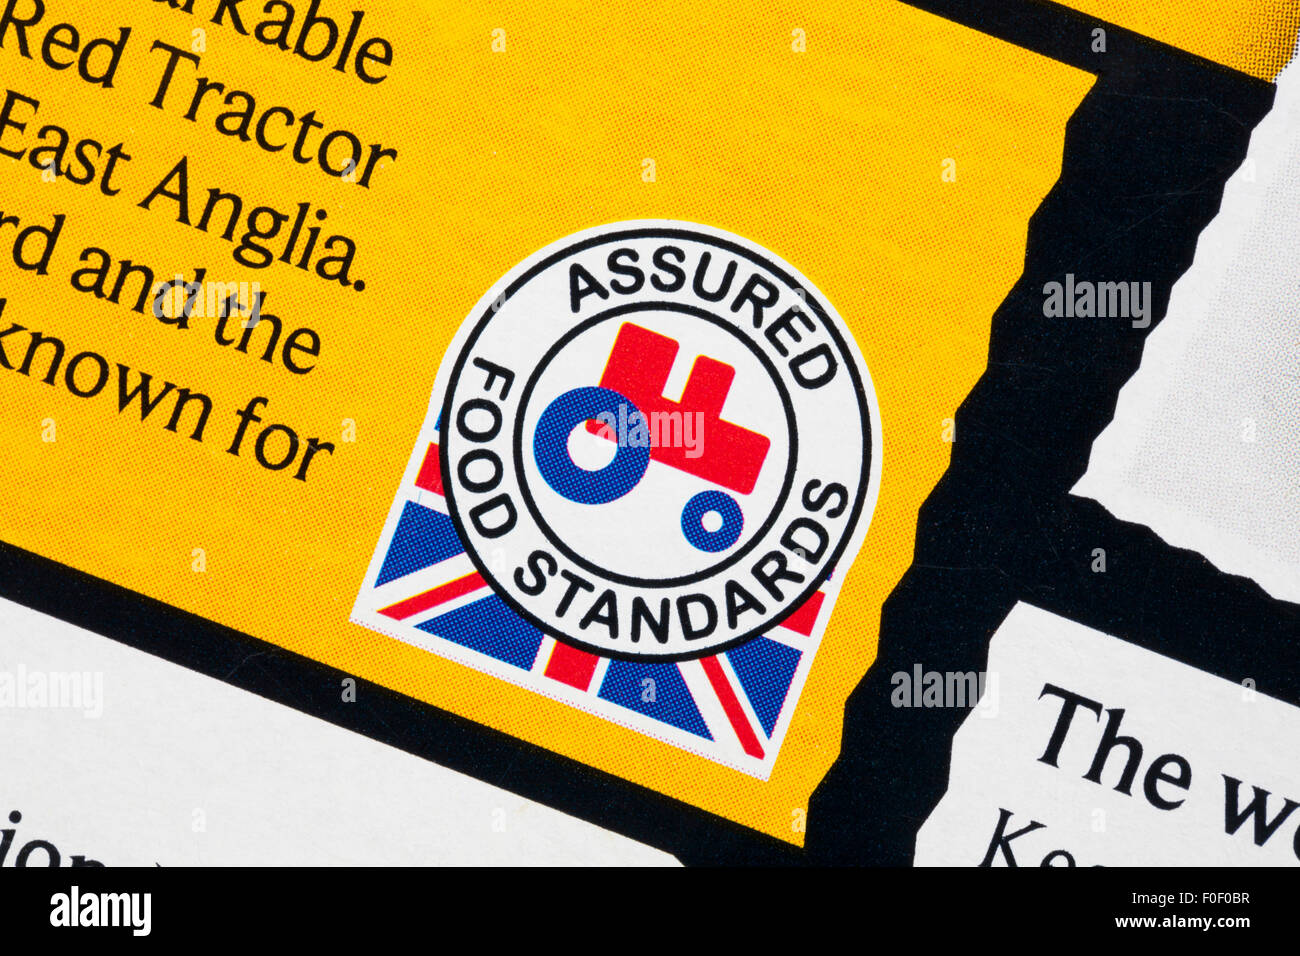 Assured Food Standards logo with little red tractor Stock Photo